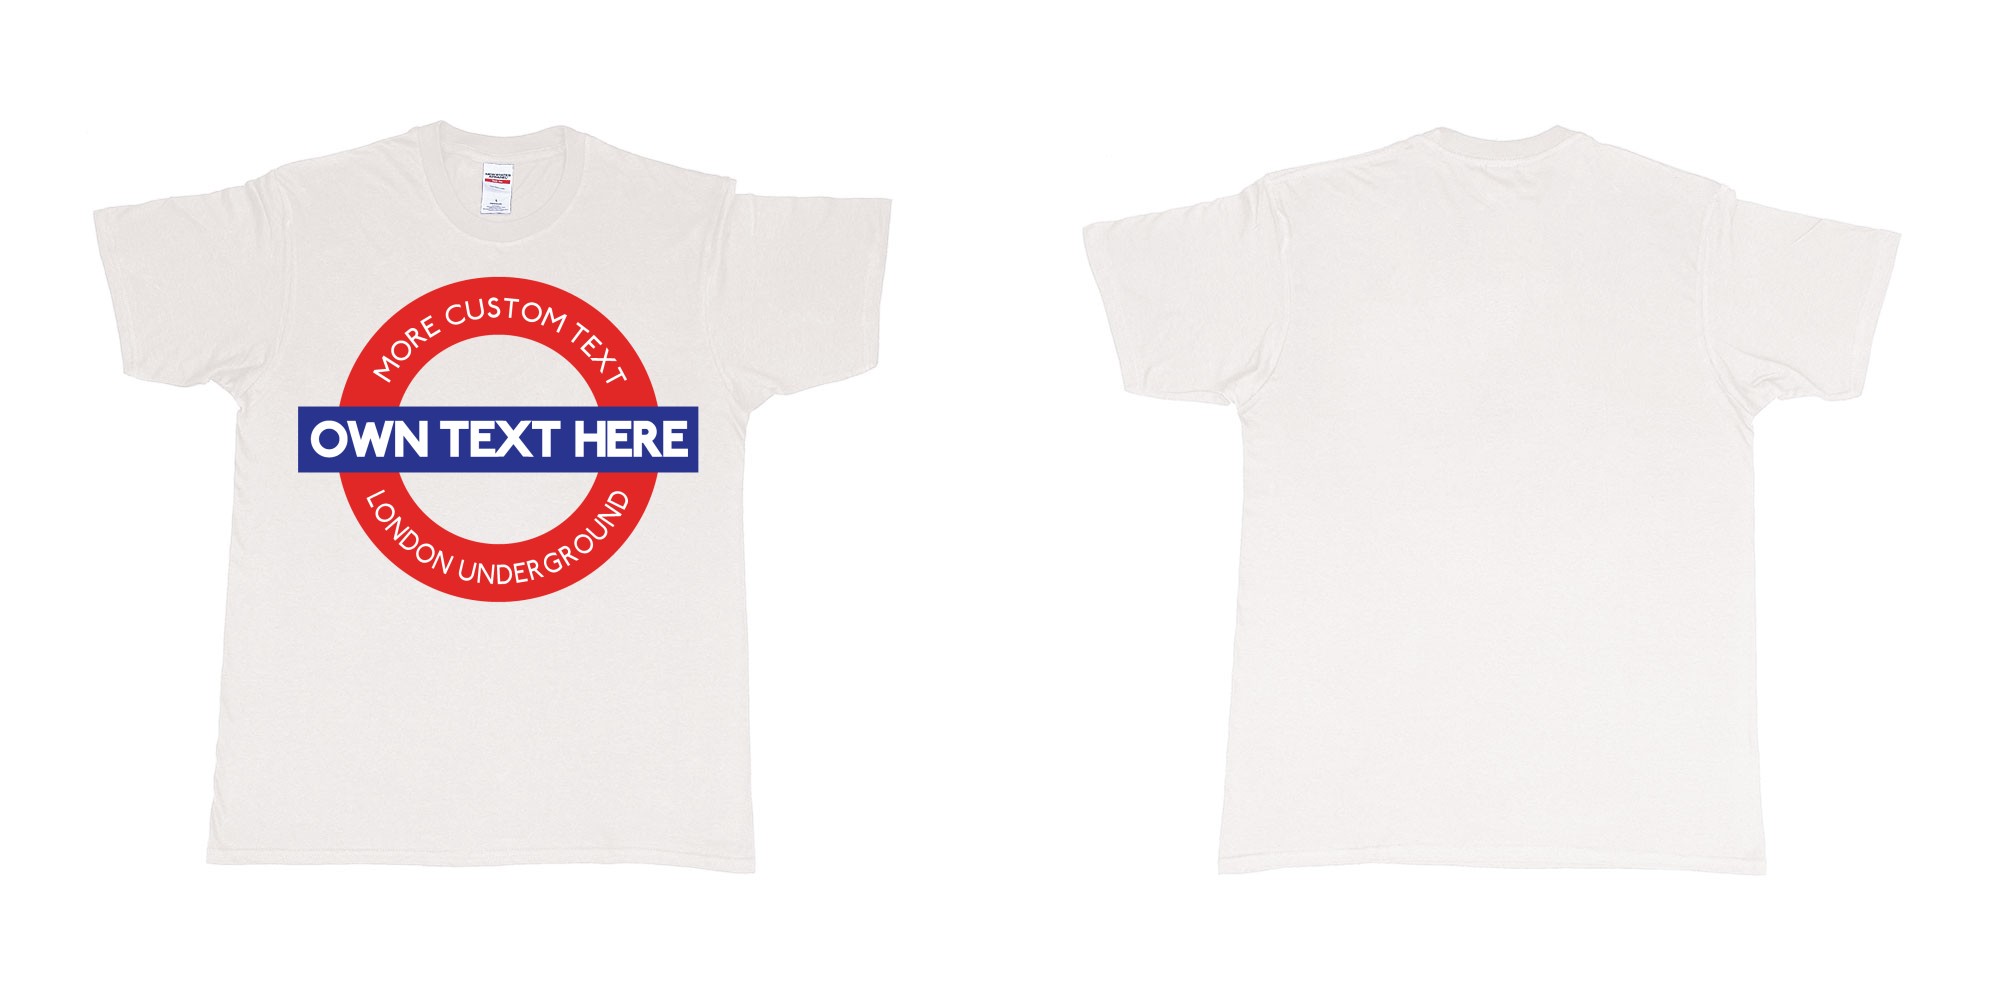 Custom tshirt design london underground logo custom design in fabric color white choice your own text made in Bali by The Pirate Way